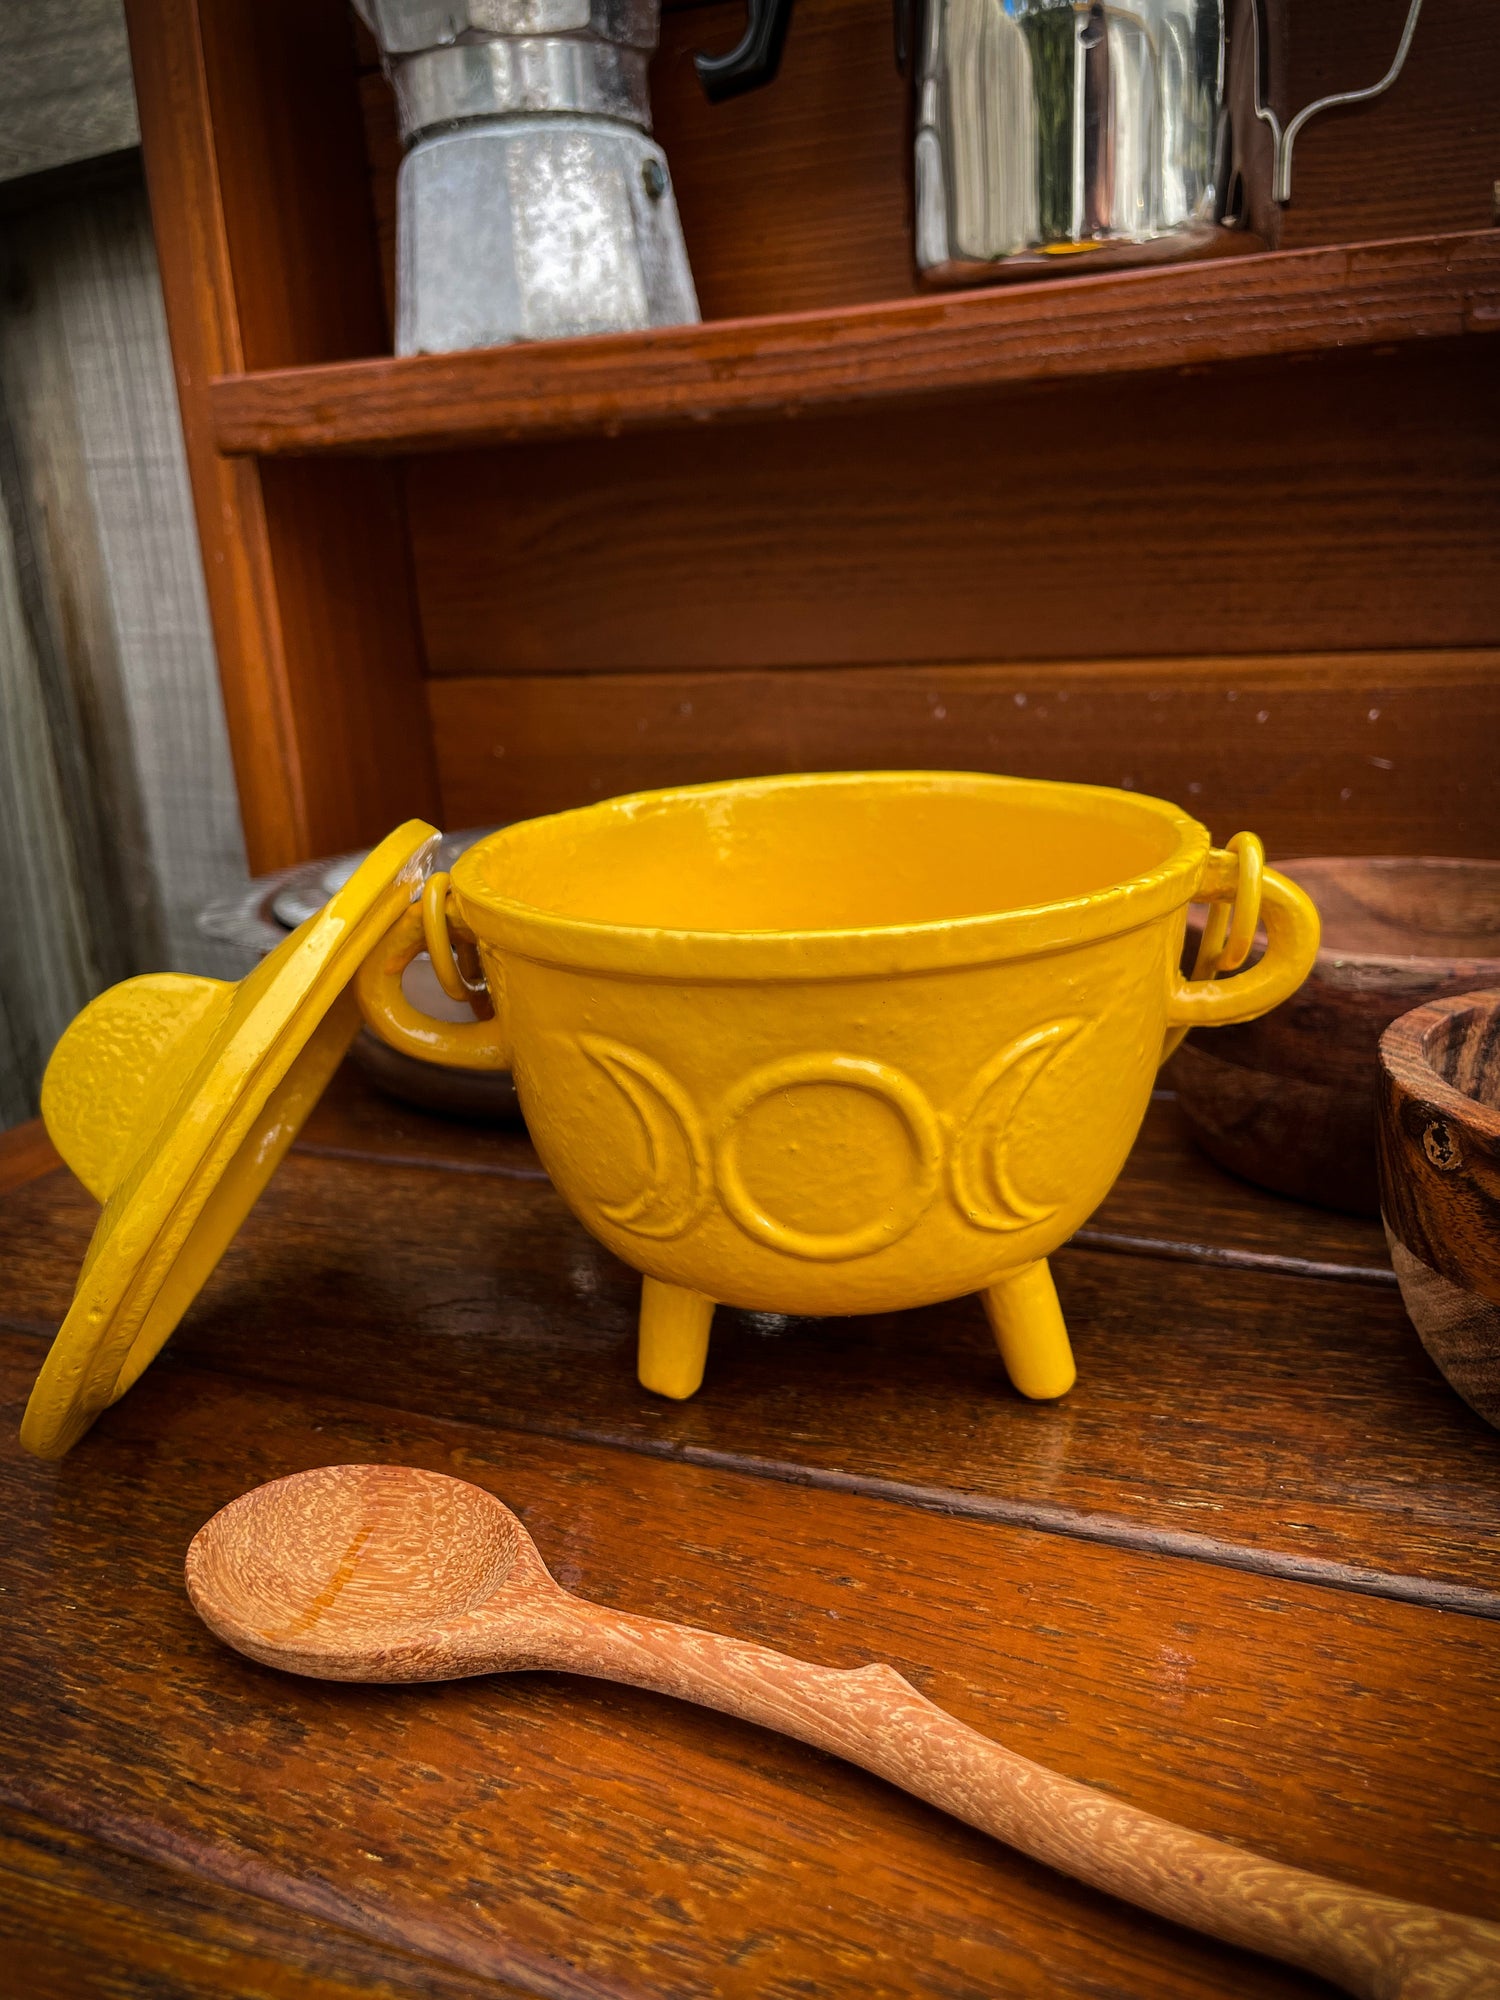 THE PLAYFUL COLLECTIVE | TRIPLE MOON CAST IRON CAULDRON - YELLOW by THE PLAYFUL COLLECTIVE - The Playful Collective